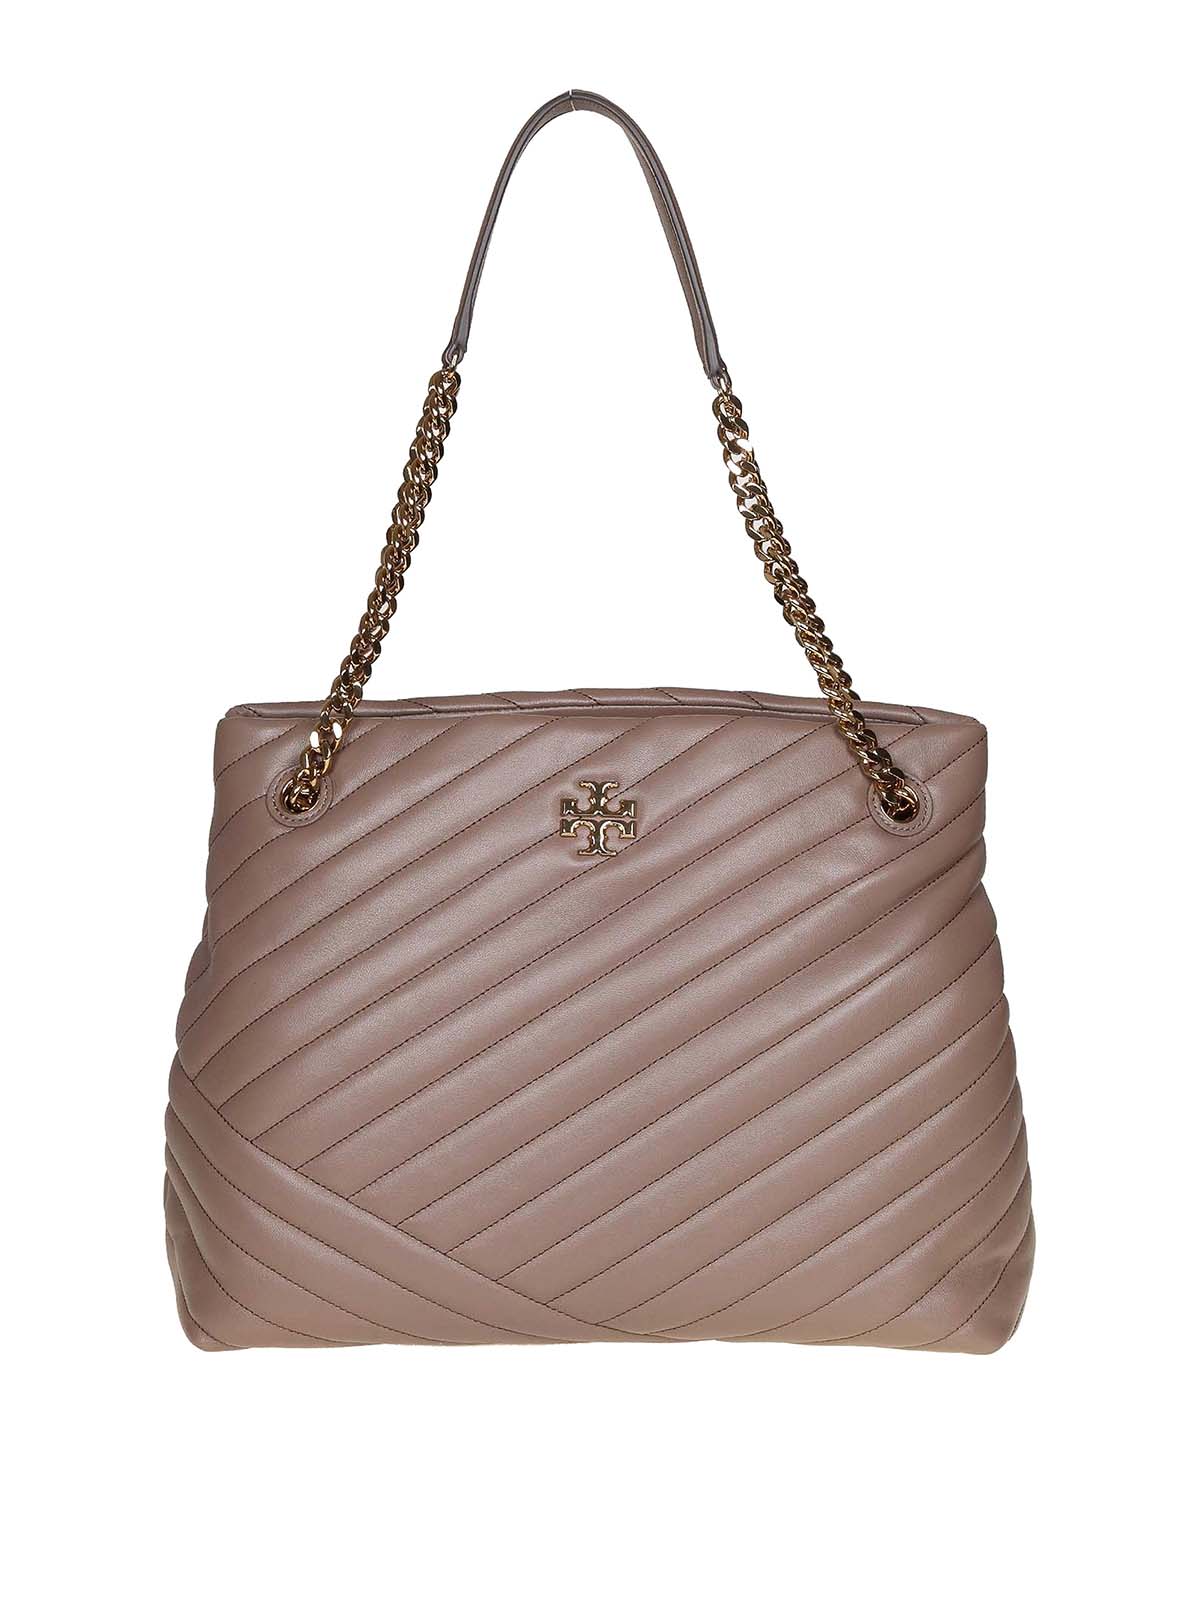 Tory Burch Kira Chevron Quilted Leather Bag In Taupe | ModeSens